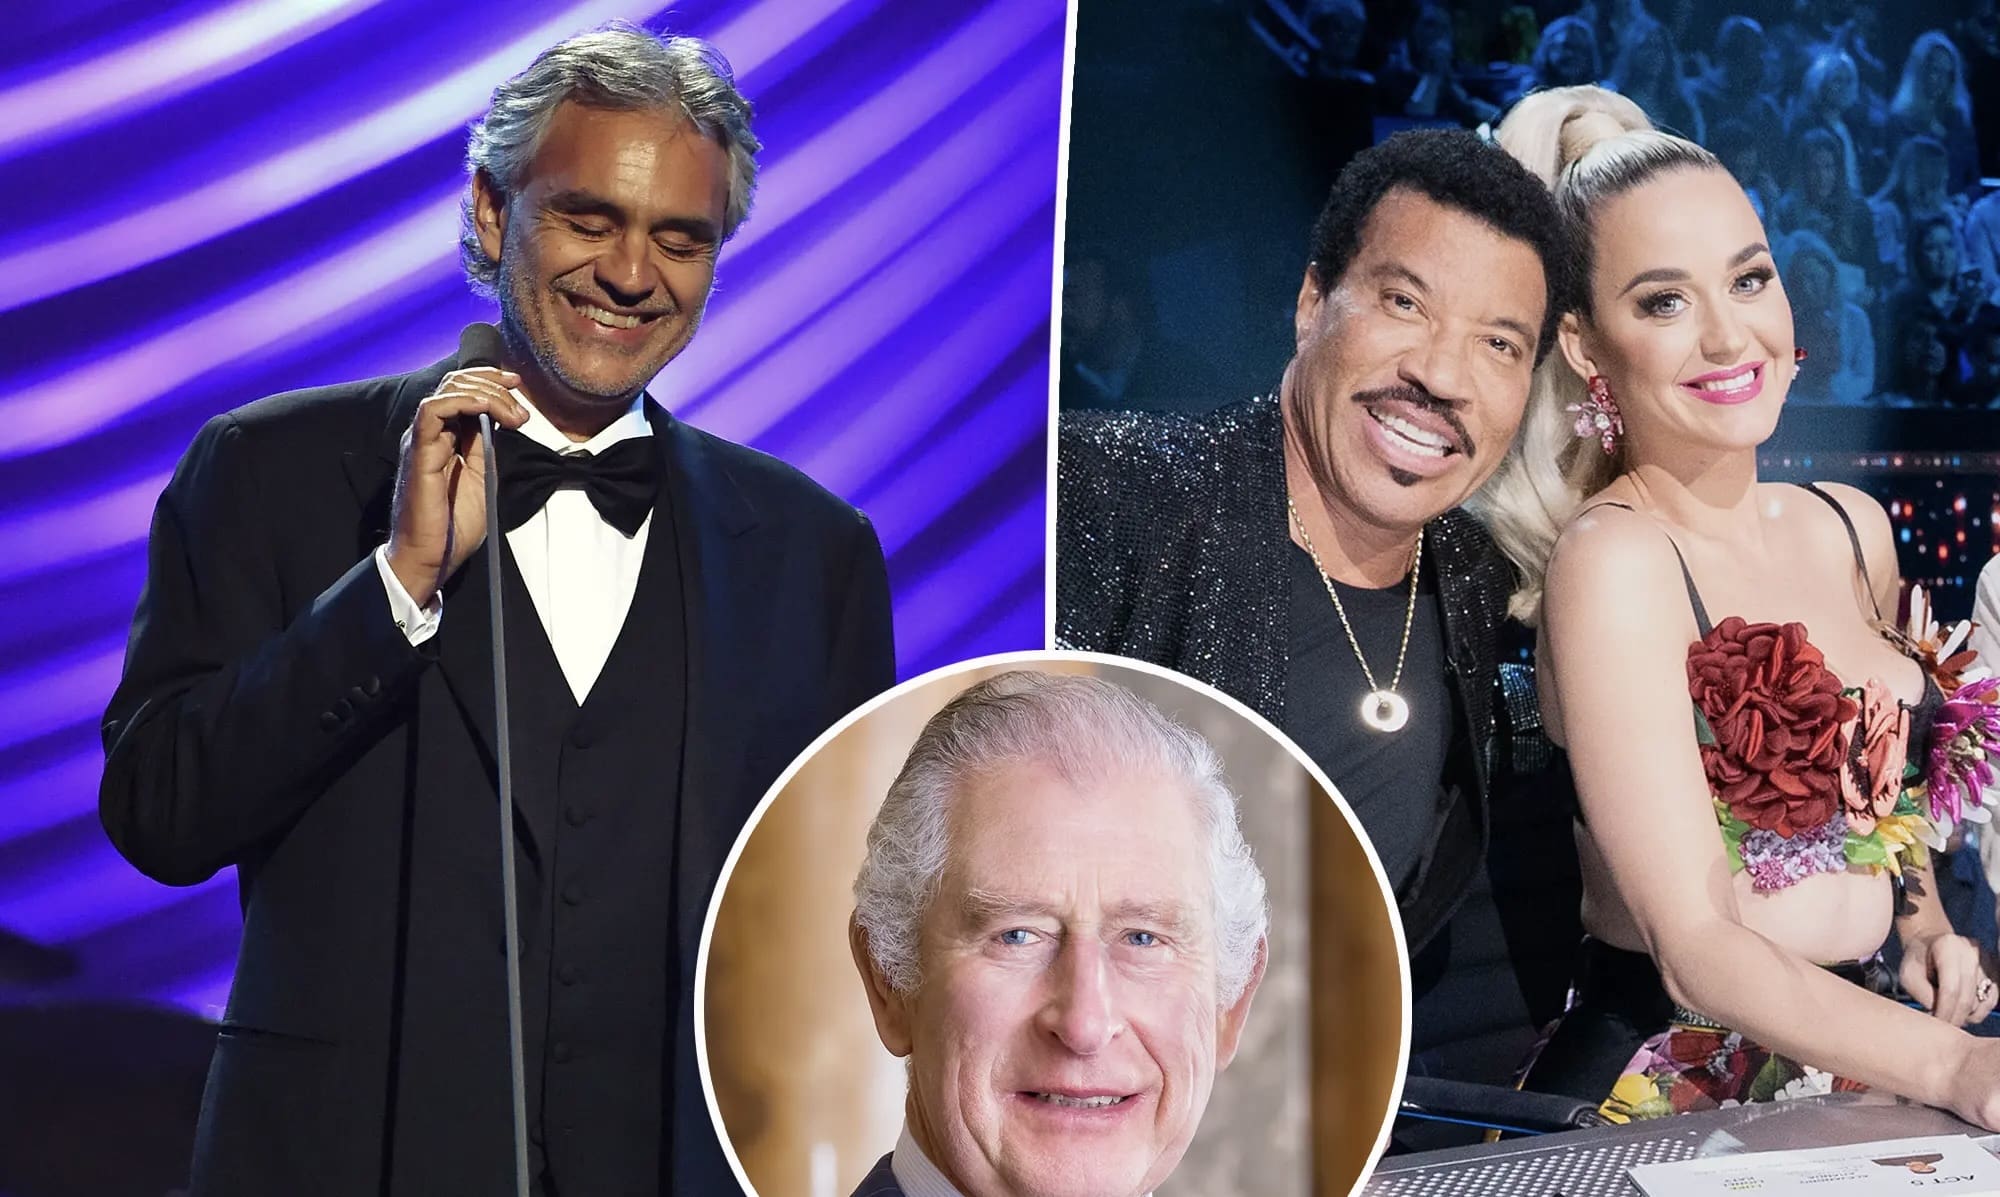 Katy Perry, Lionel Richie, Take That, And Andrea Bocelli Will Play King Charles’ Coronation In May